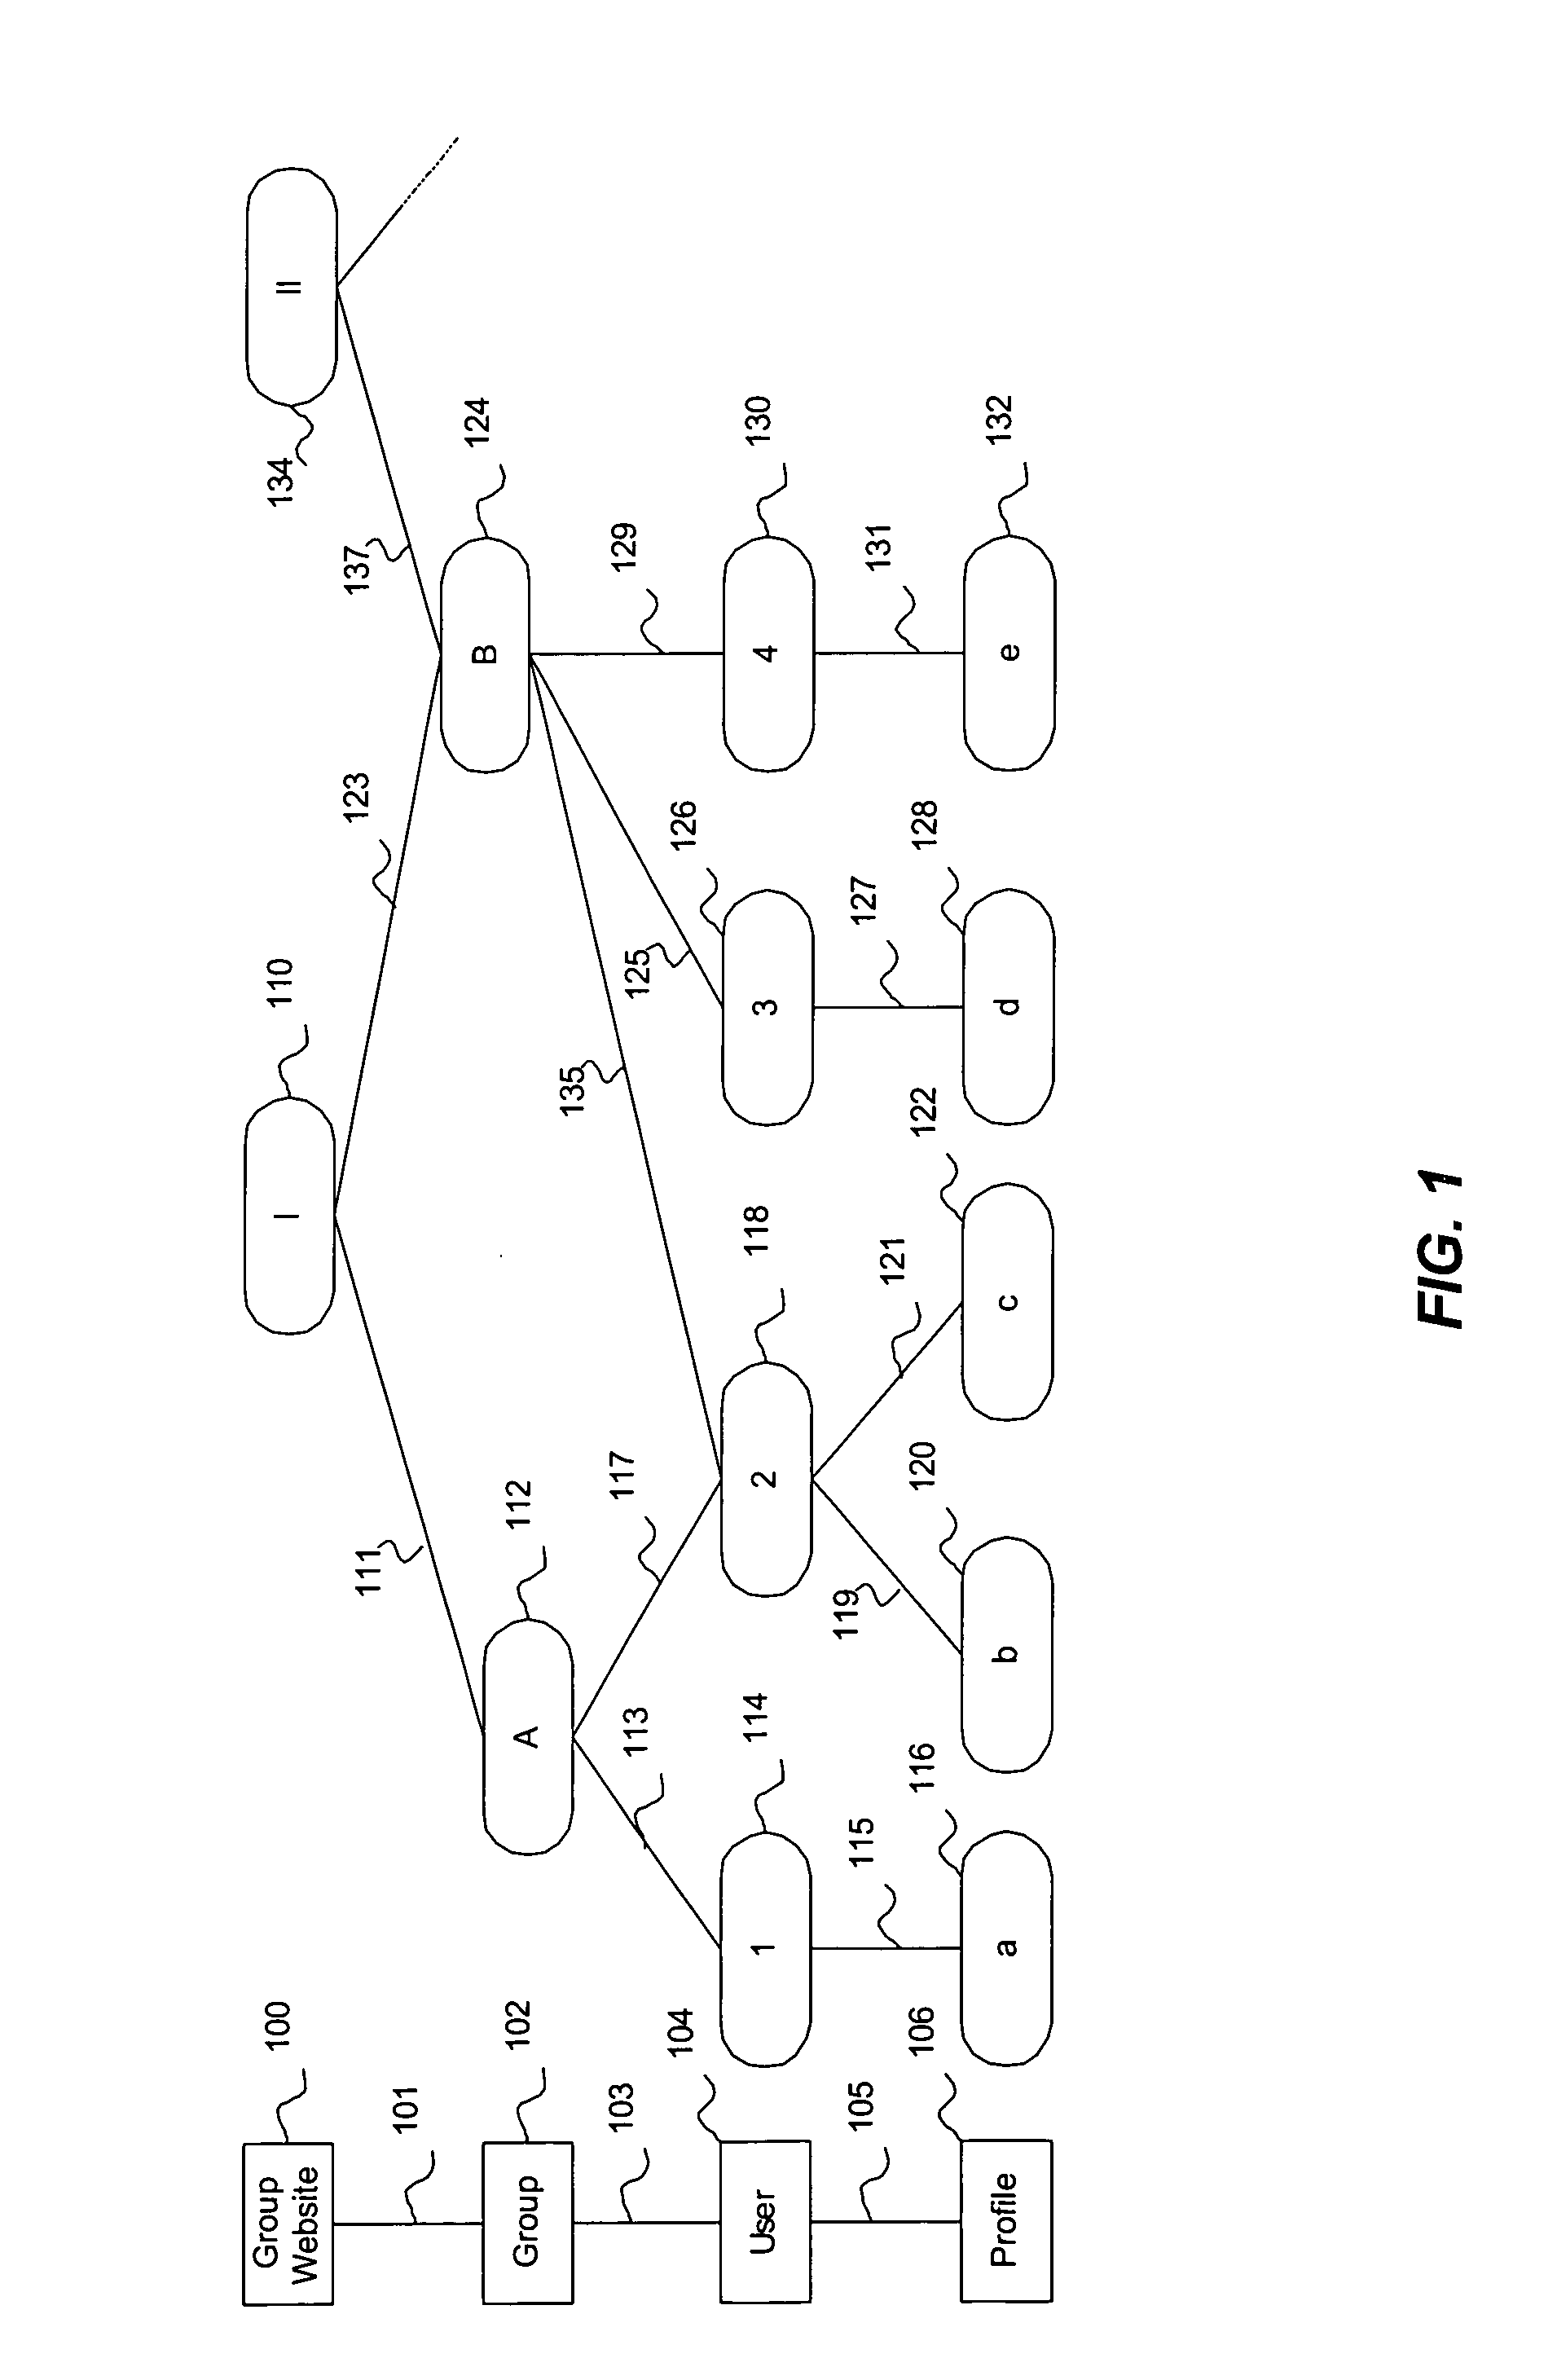 System and method for managing personal information